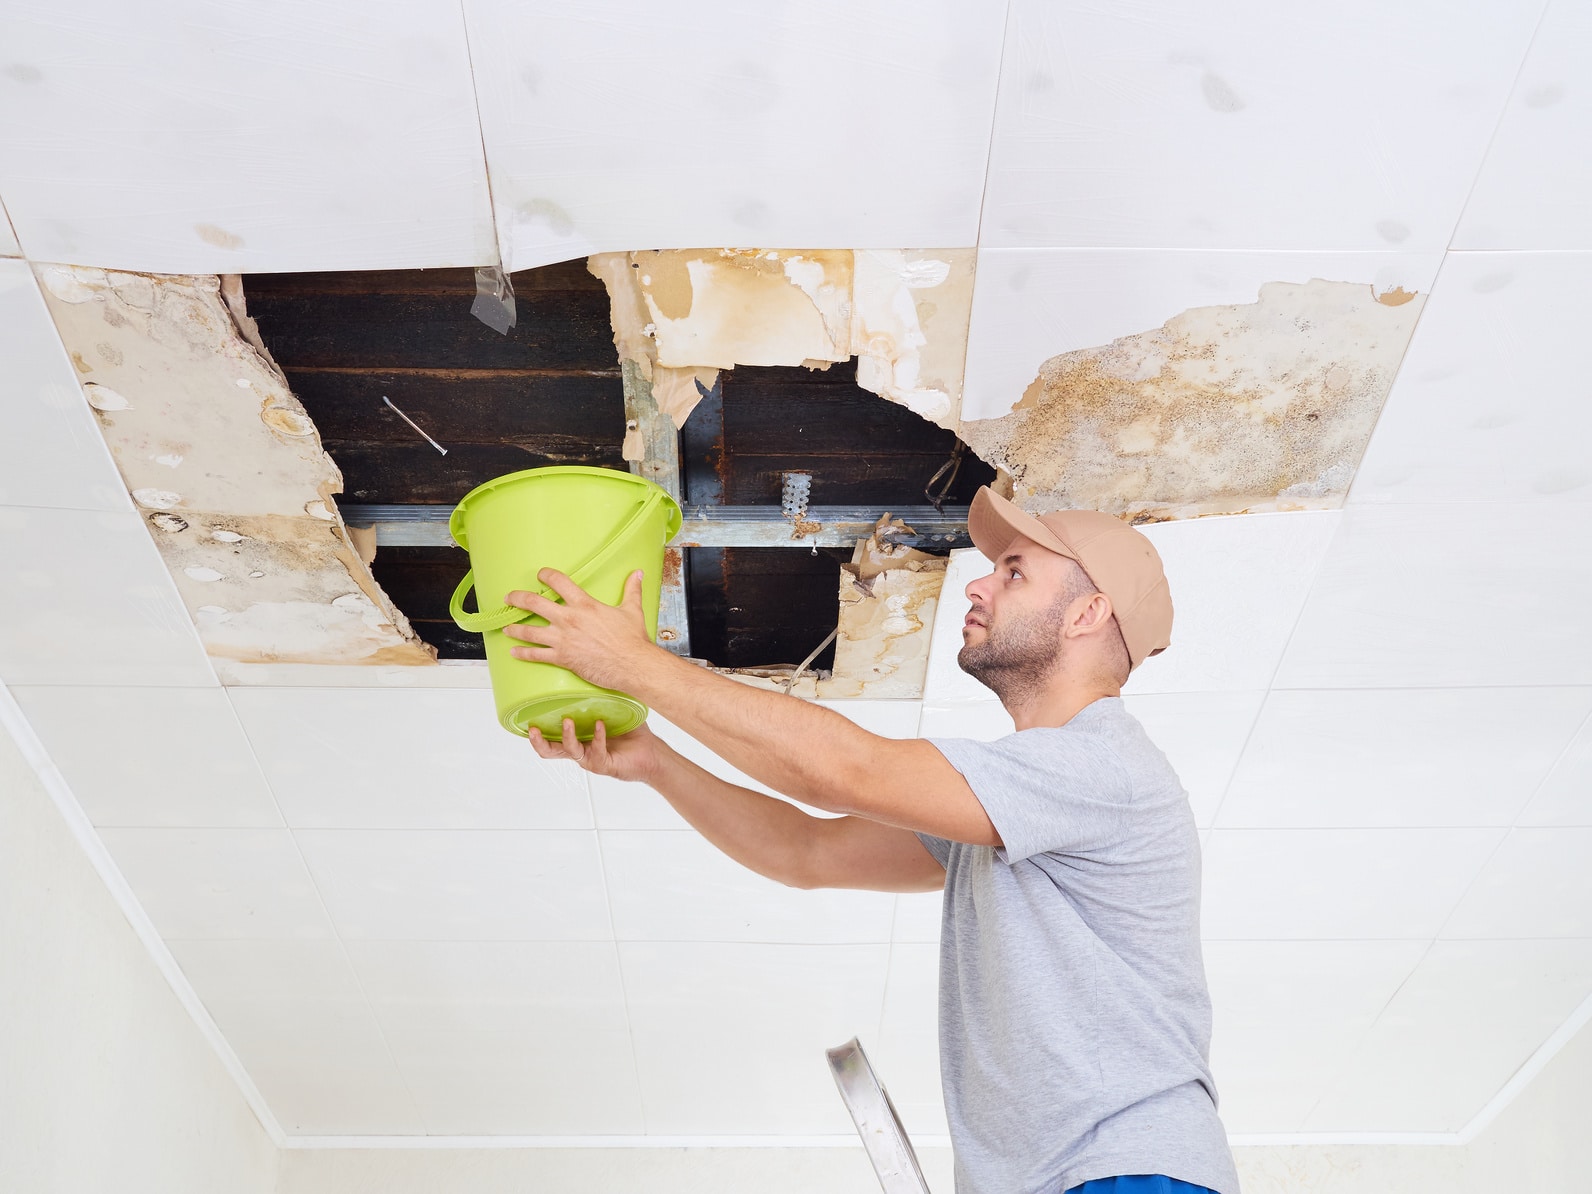 When you have water damage, there are do’s and don’ts you should keep in mind to prevent the damage from spreading. Check them out here.